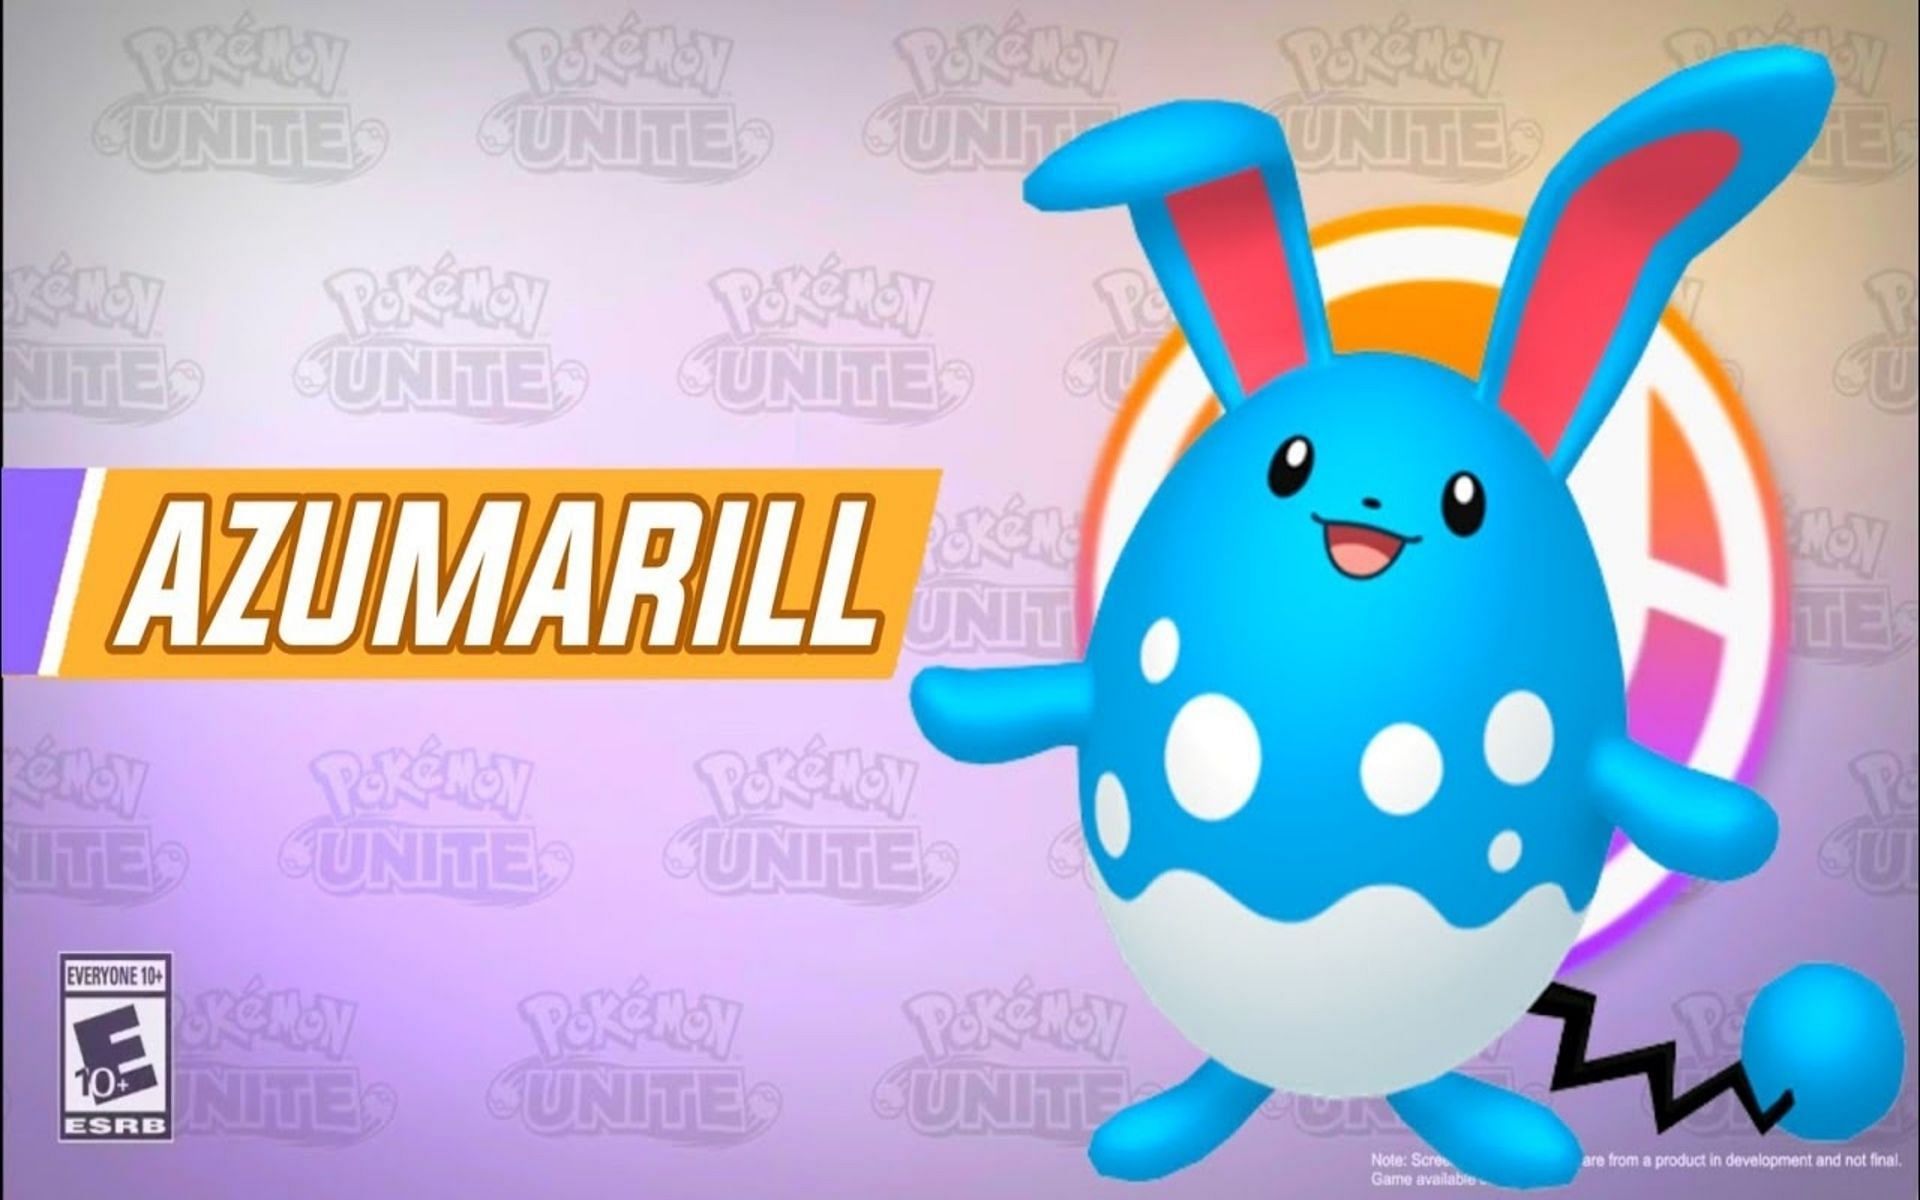 Azumarill will be an All-Rounder (Image via TiMi Studios)